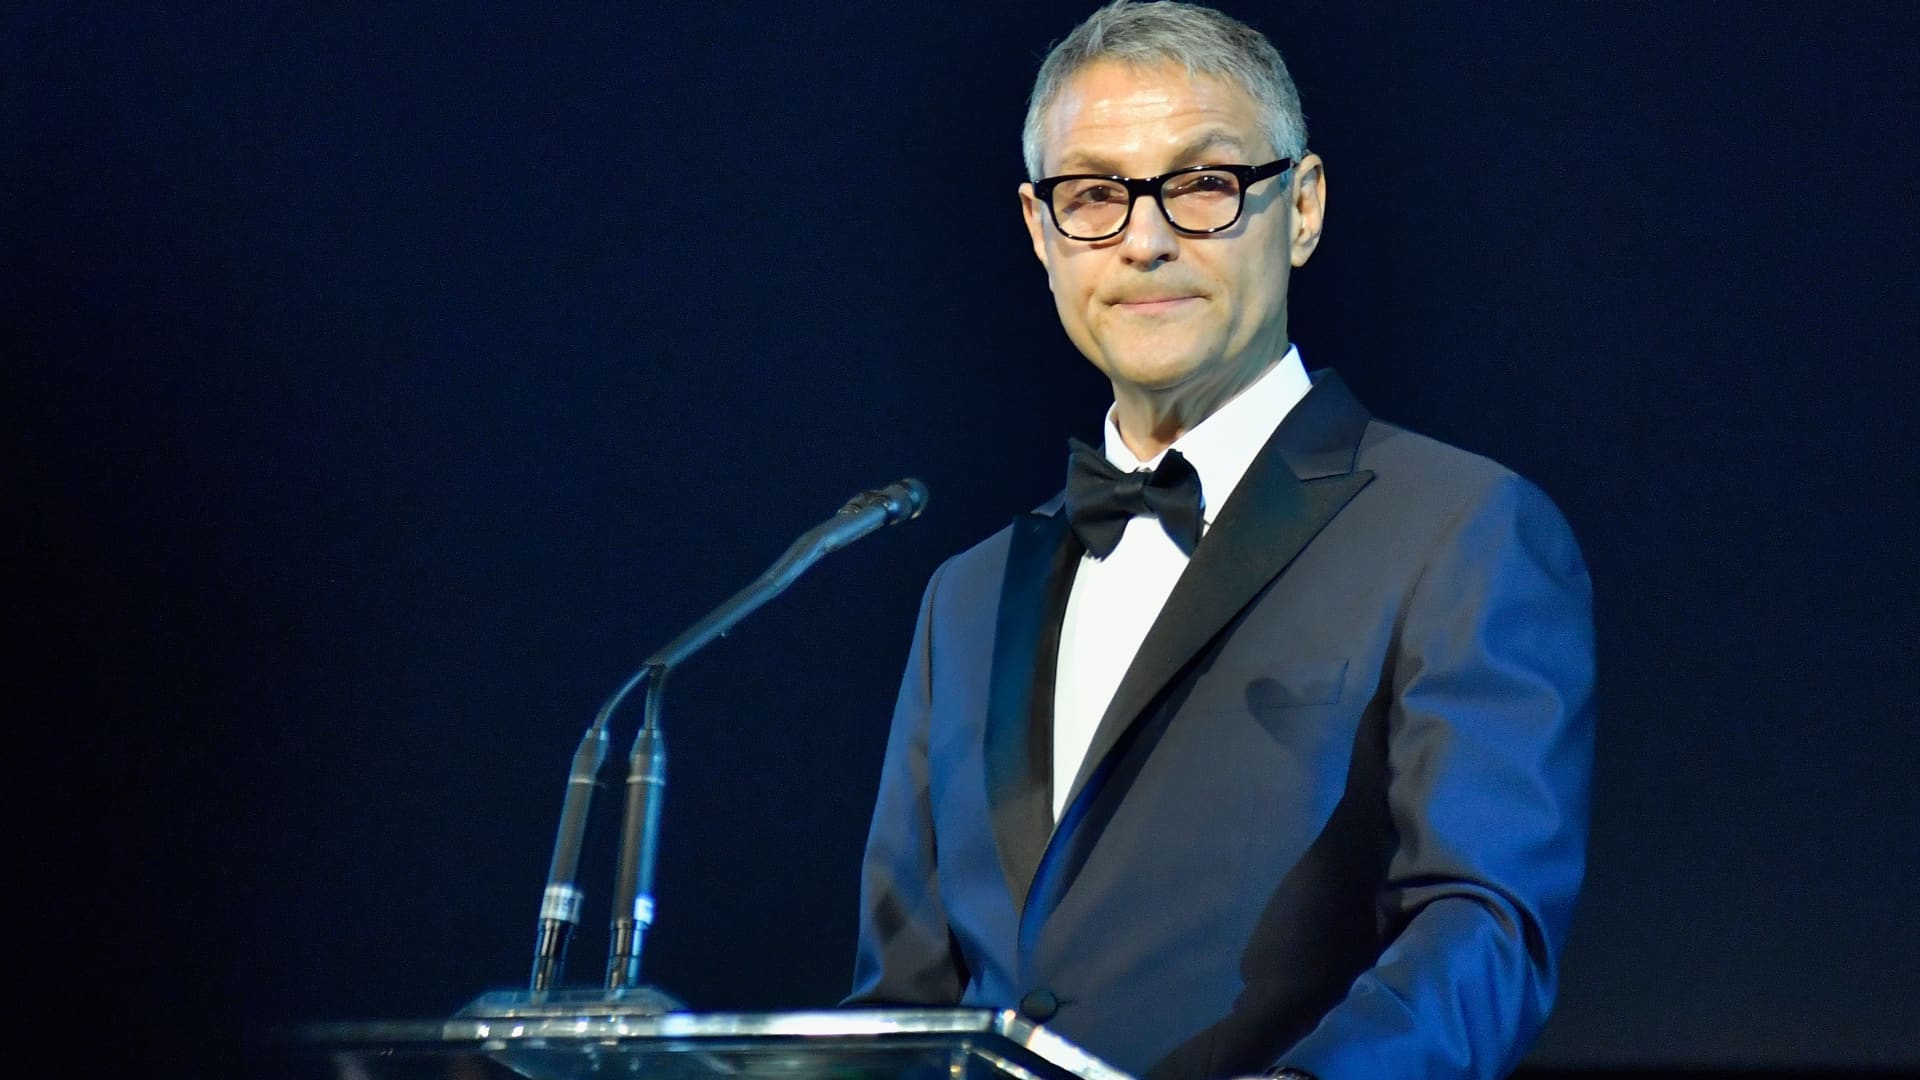 Ari Emanuel speaks onstage during the 2017 LACMA Art + Film Gala Honoring Mark Bradford and George Lucas presented by Gucci at LACMA on November 4, 2017 in Los Angeles, California. 